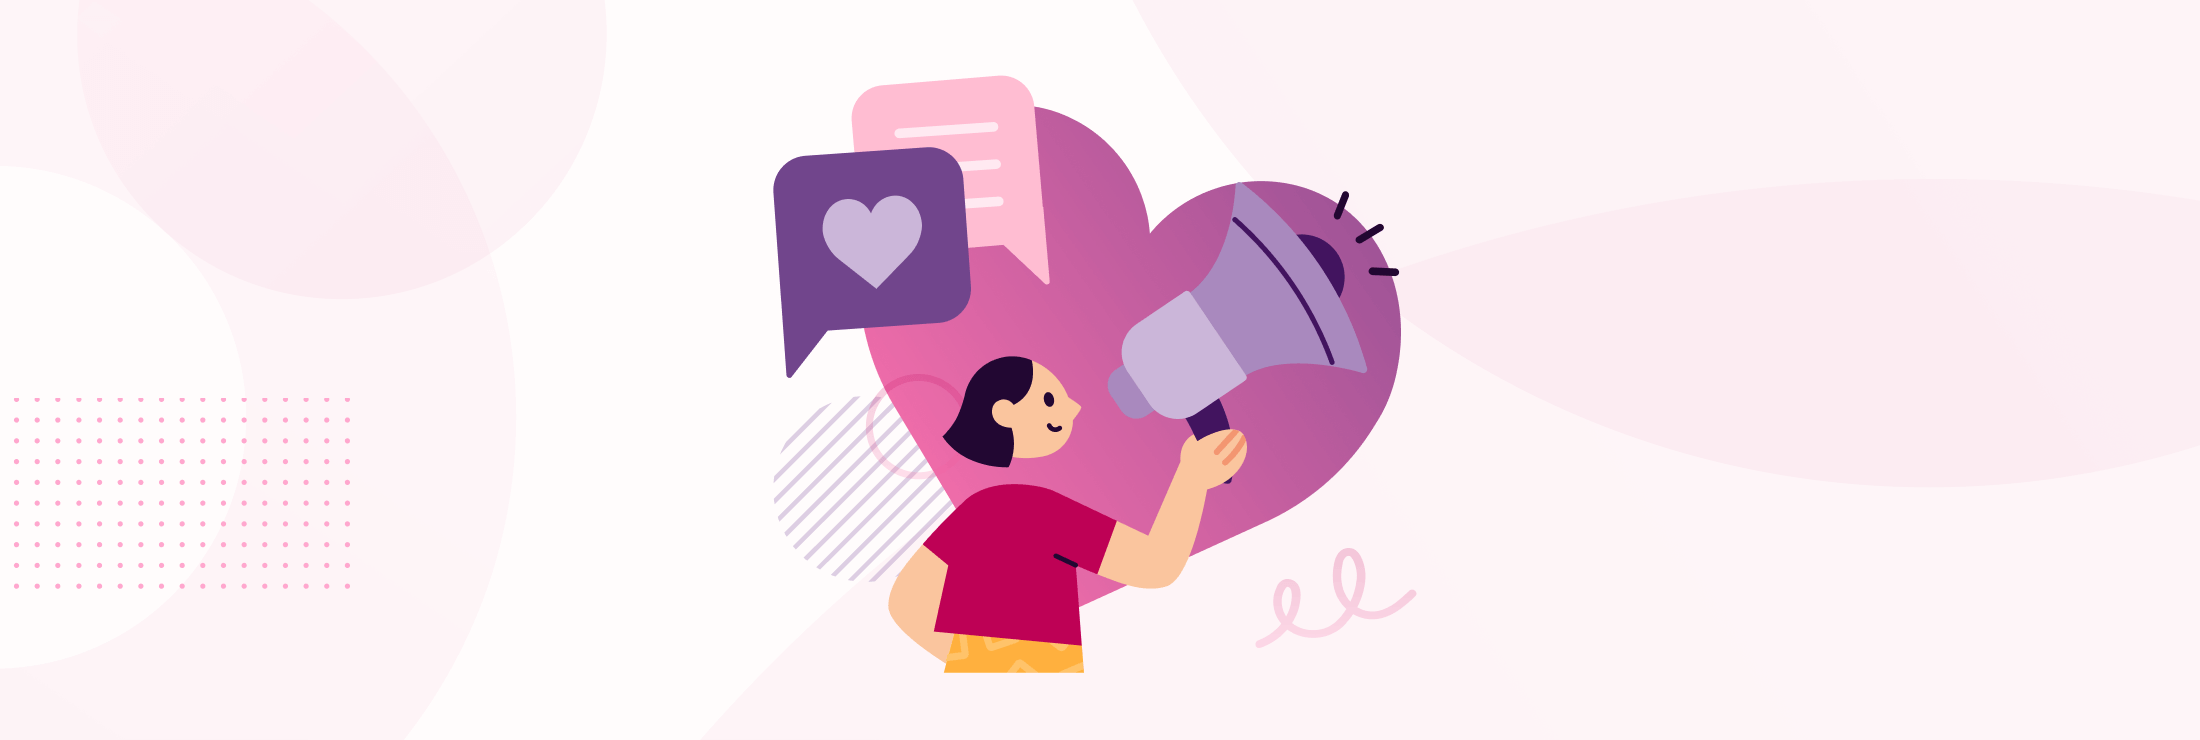 Image with hearts and person using megaphone to identify why to use WhatsApp for better customer relationships